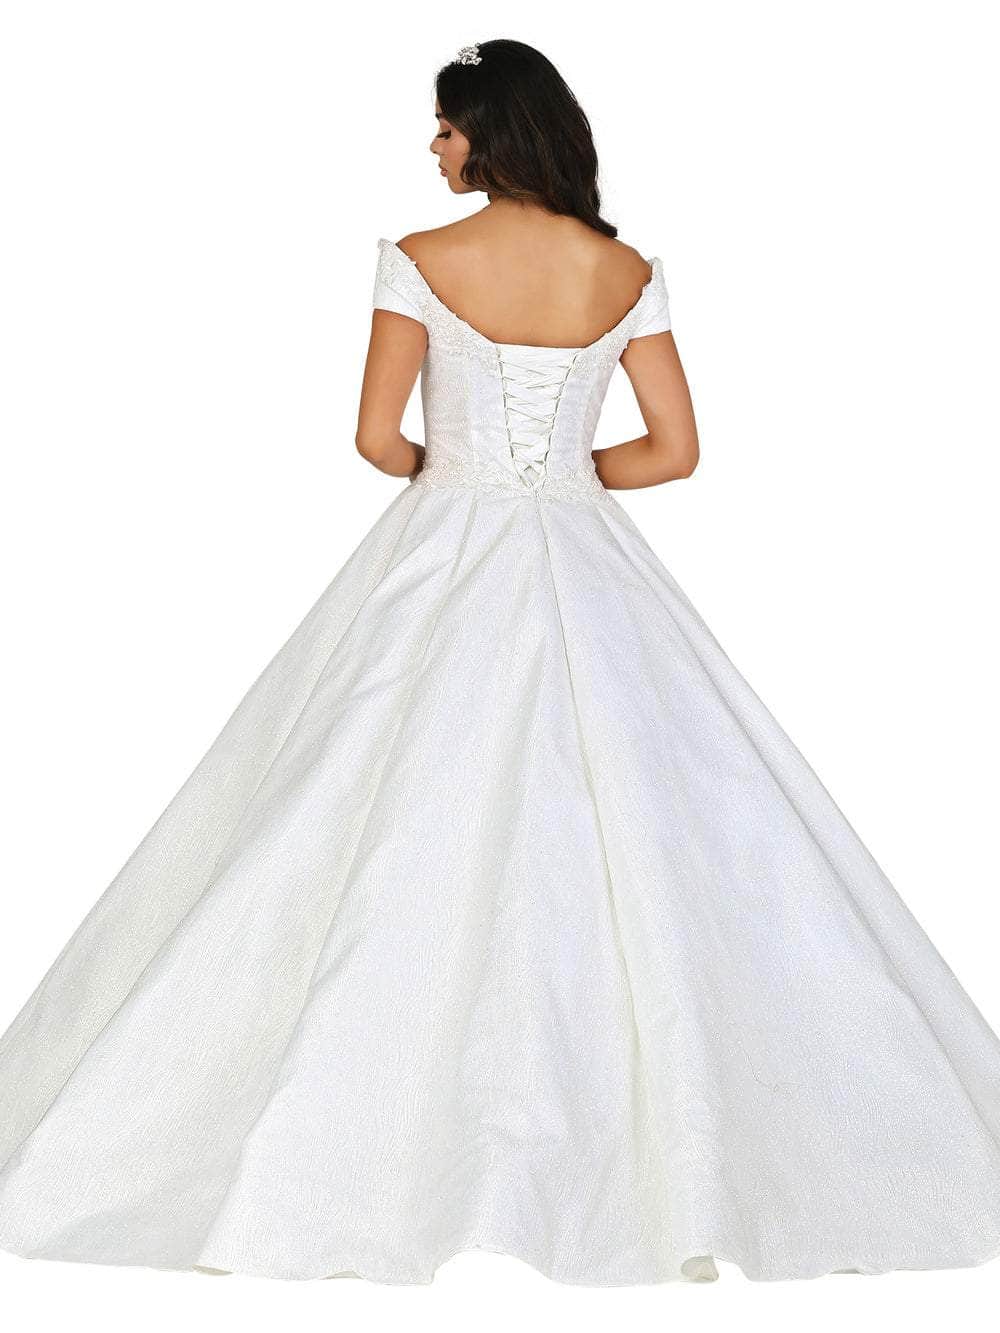 Dancing Queen 0107 - Embroidered Off-Shoulder Ballgown Special Occasion Dresses